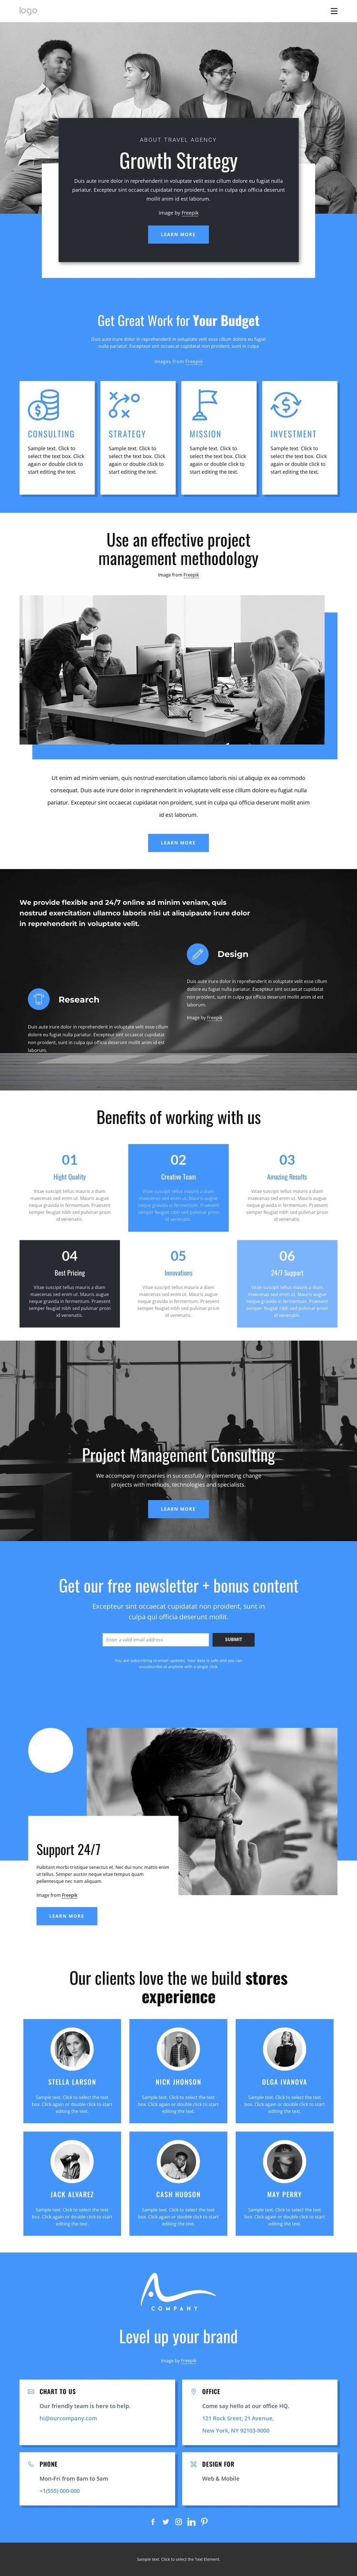 Growth strategy consulting company Web Page Design